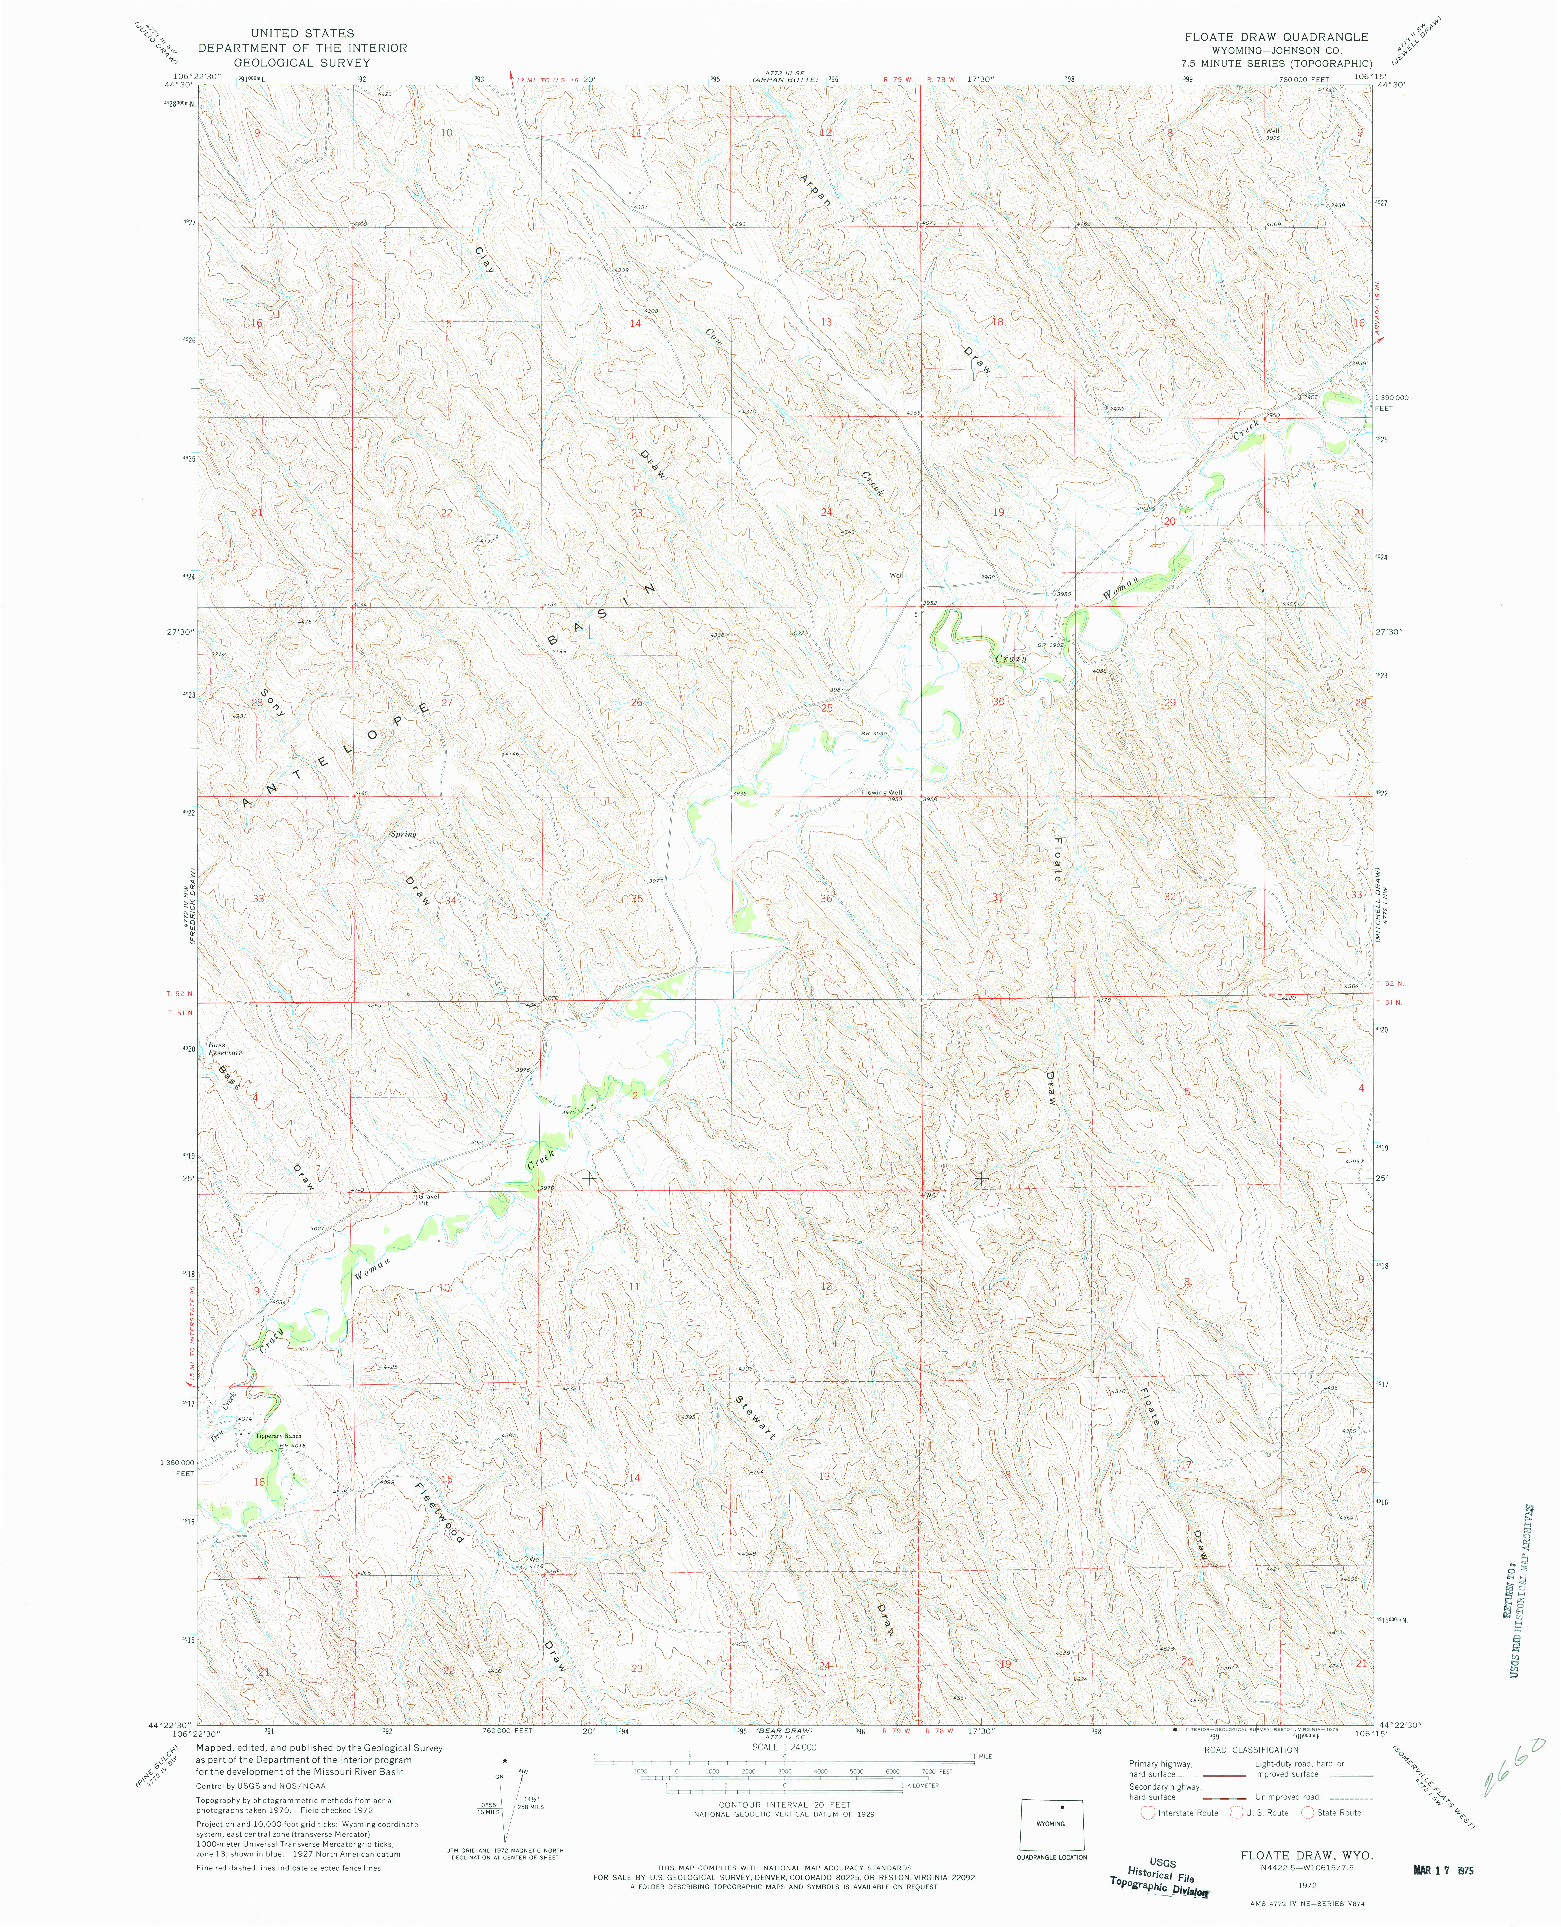 USGS 1:24000-SCALE QUADRANGLE FOR FLOATE DRAW, WY 1972